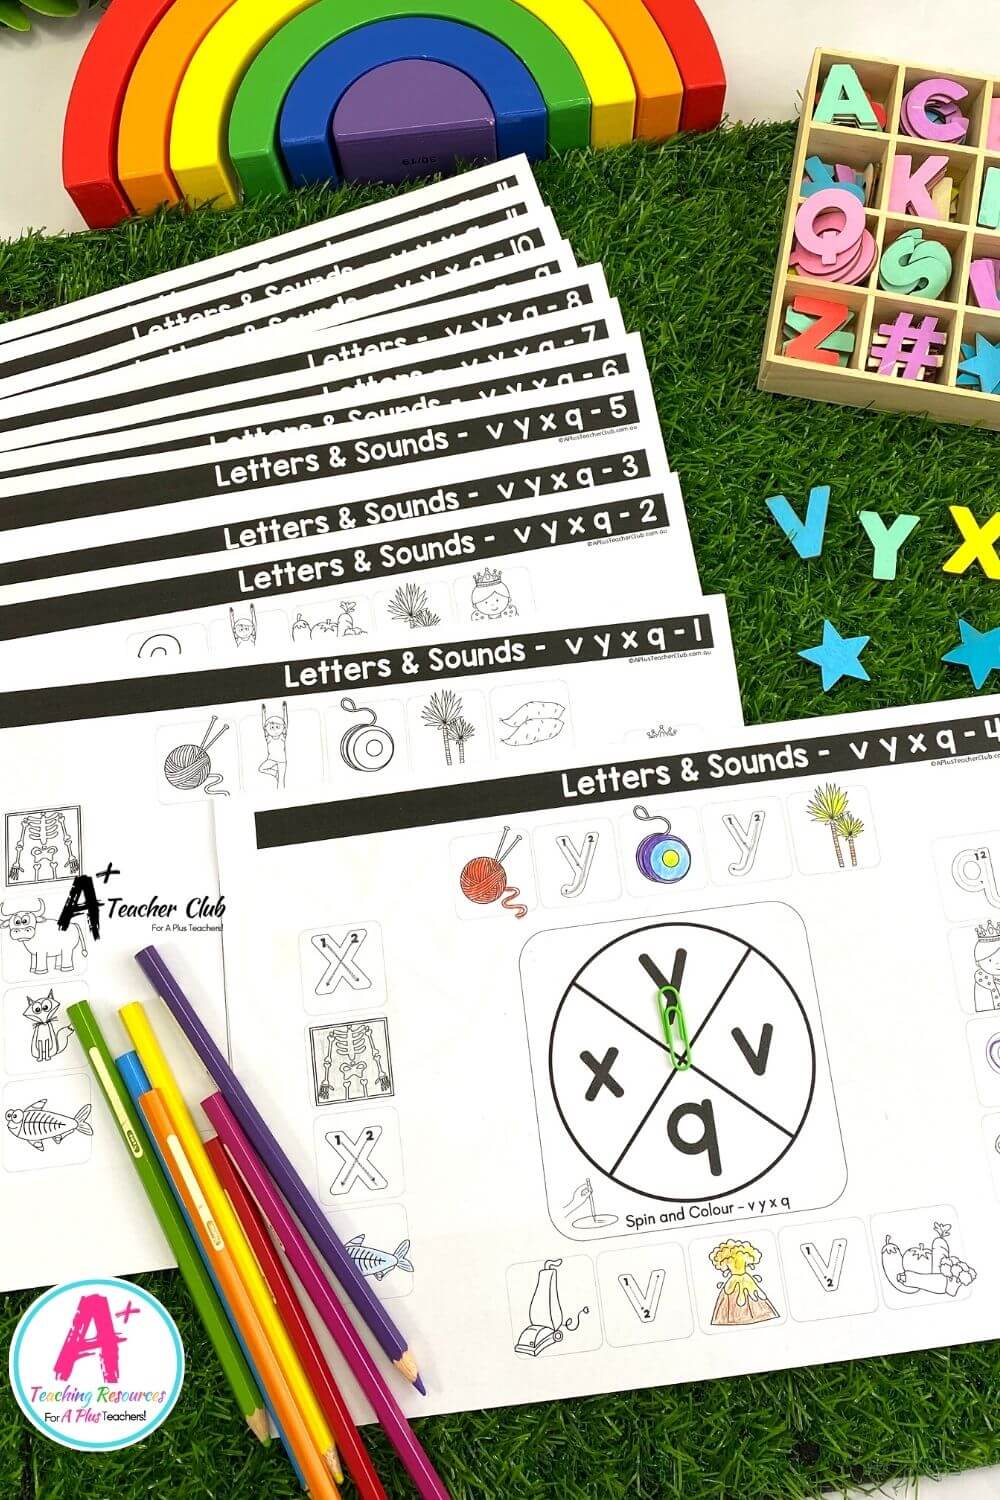 VYXQ Spin & Colour Worksheets (B&W LOWER CASE)